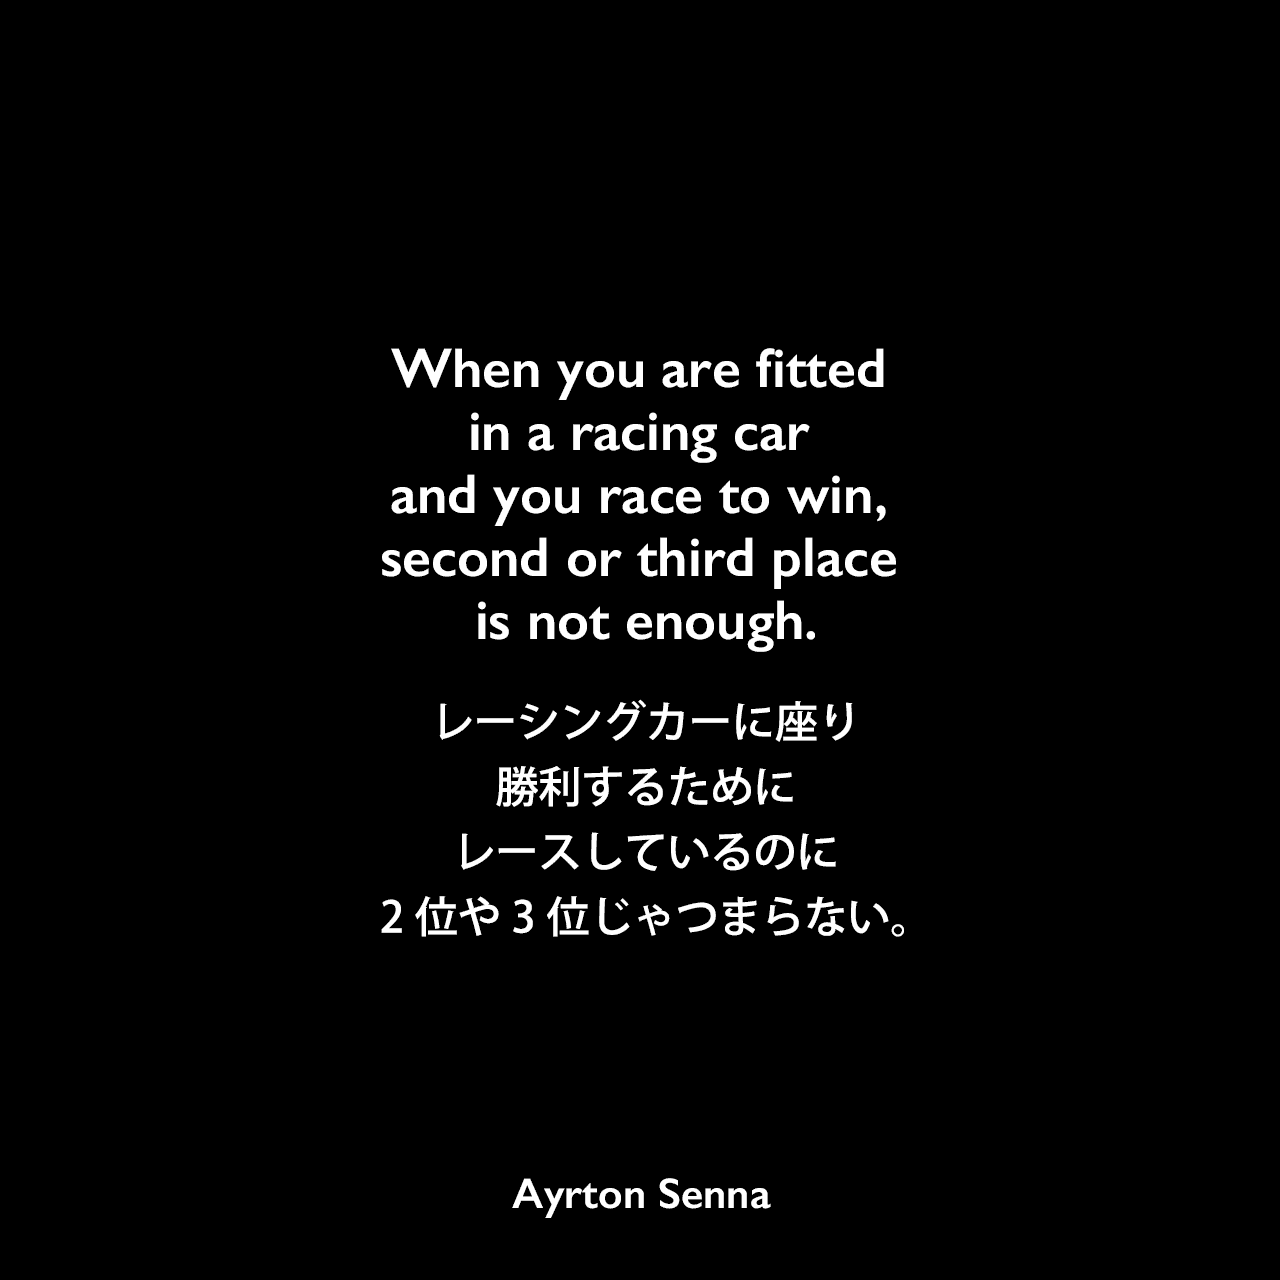 When you are fitted in a racing car and you race to win, second or third place is not enough.レーシングカーに座り勝利するためにレースしているのに2位や3位じゃつまらない。Ayrton Senna